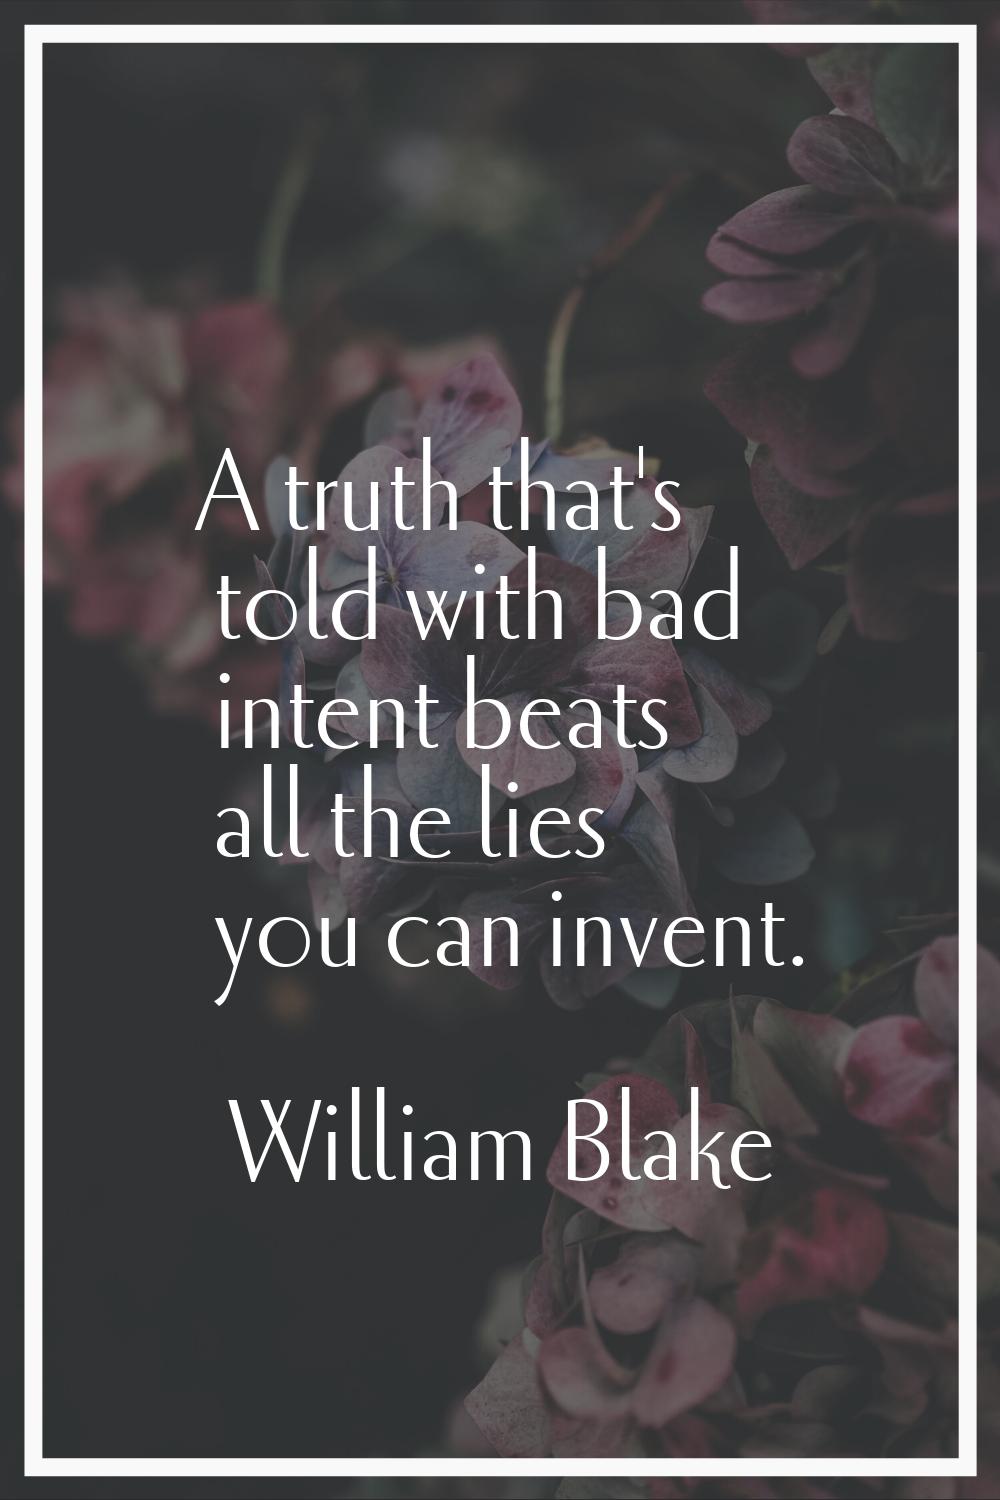 A truth that's told with bad intent beats all the lies you can invent.